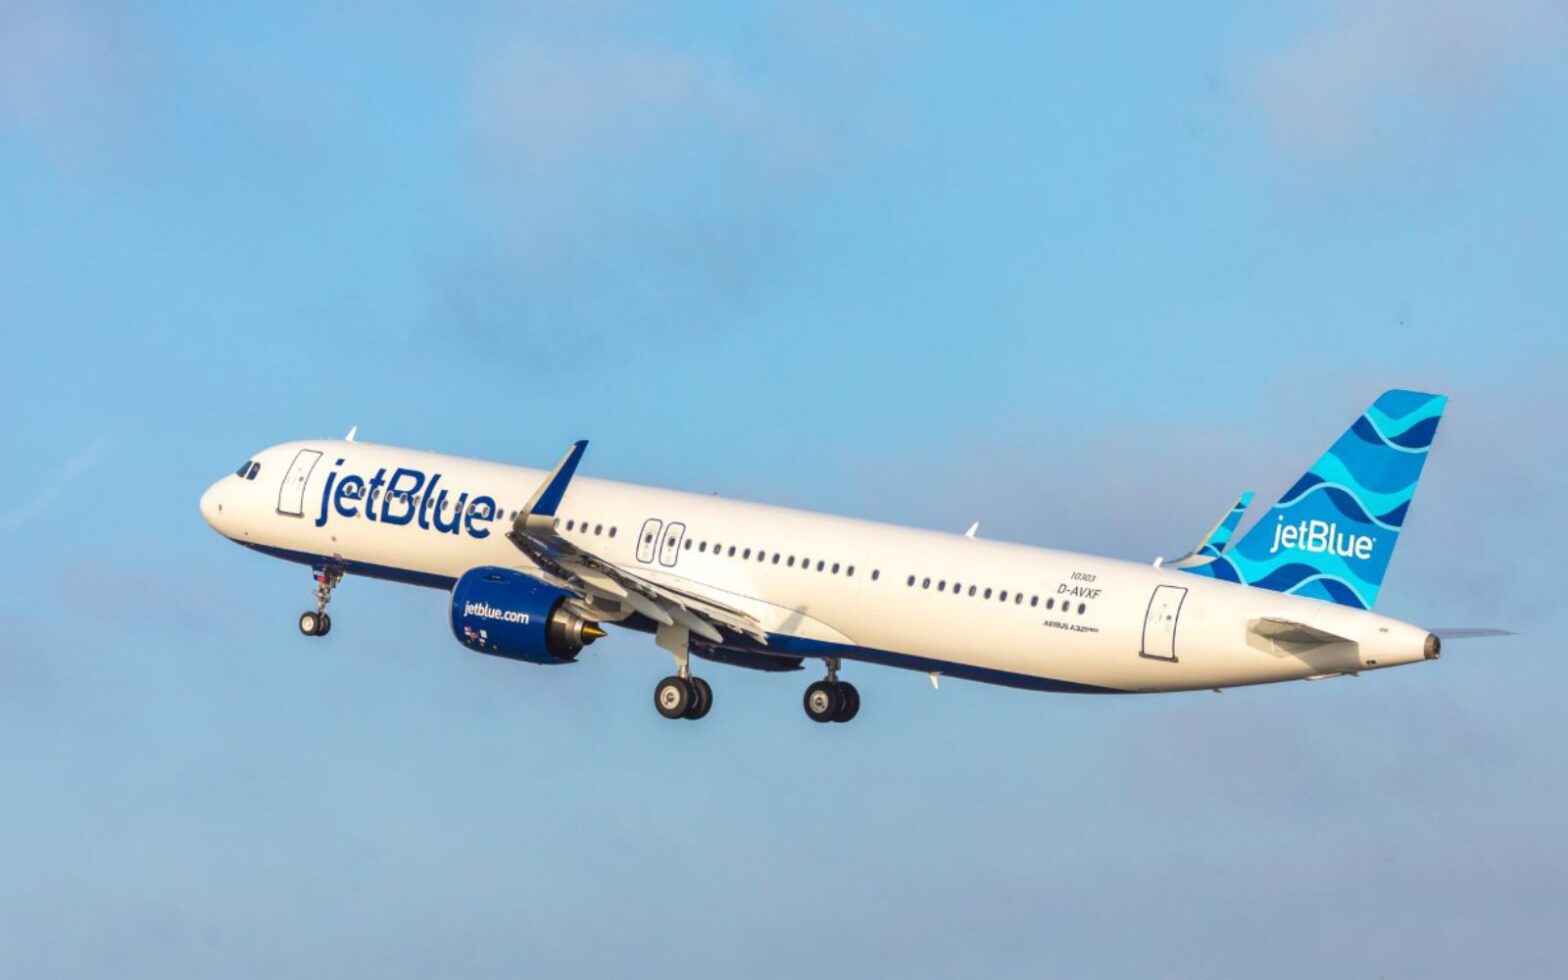 JetBlue Flights to Europe - aircraft flying in the air